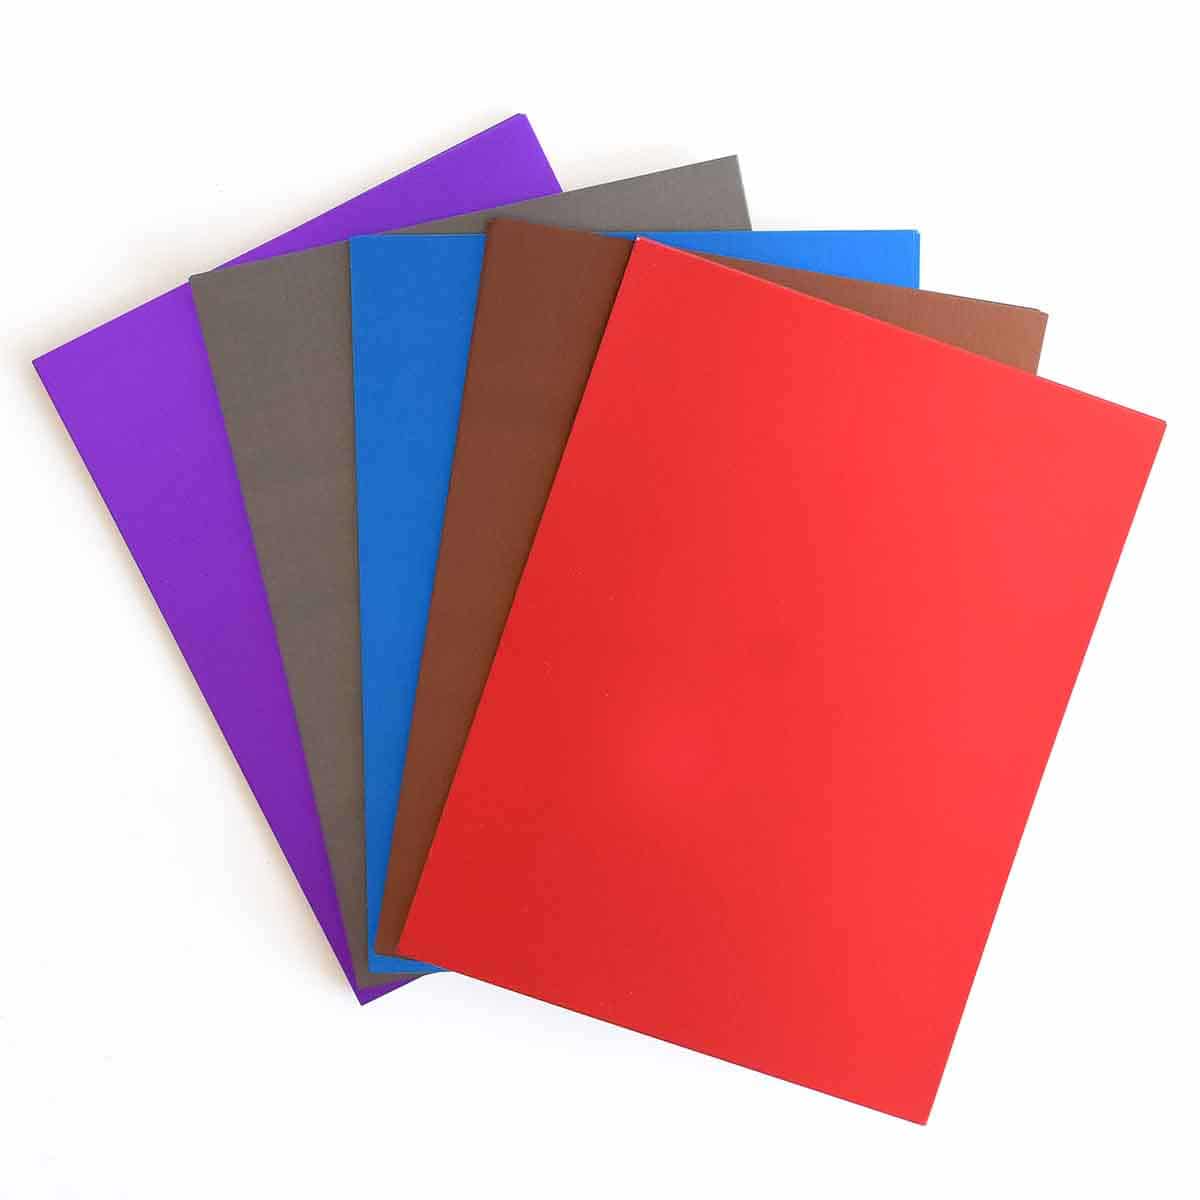 five different colors of paper on a white background.